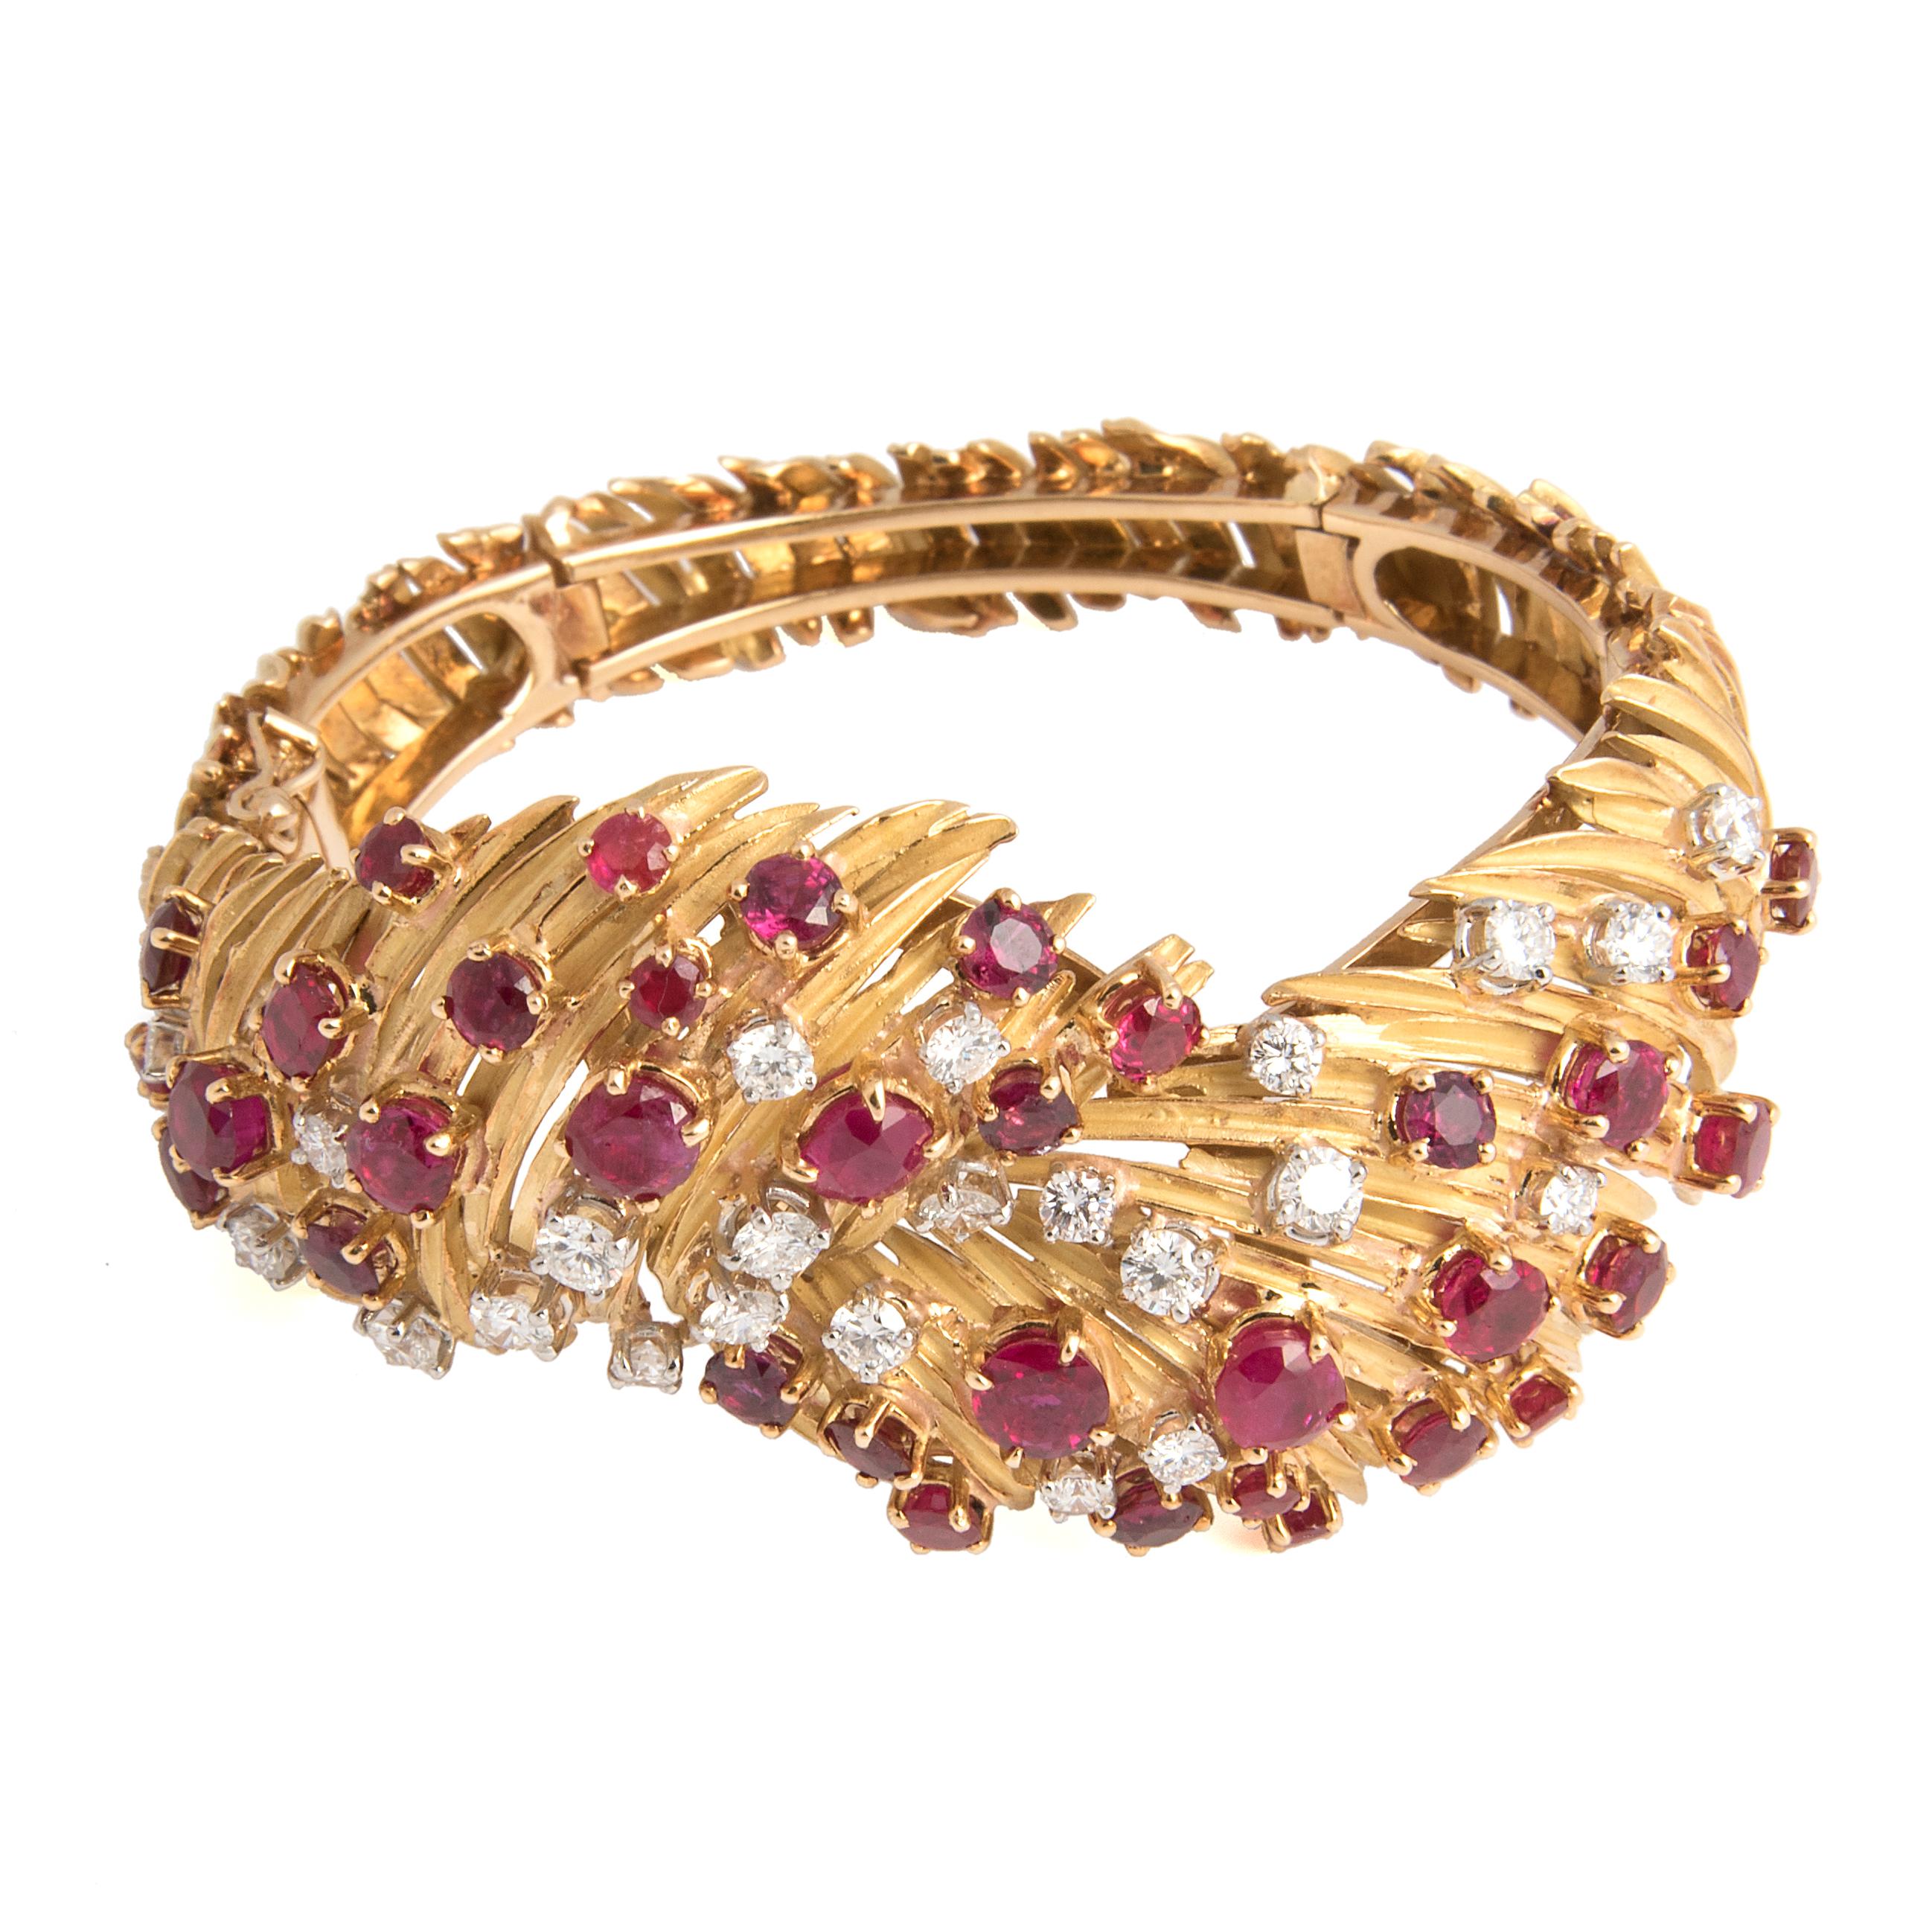 Women's Mellerio Diamond and Ruby Ring Earrings Brooch Bracelet and Necklace Parure